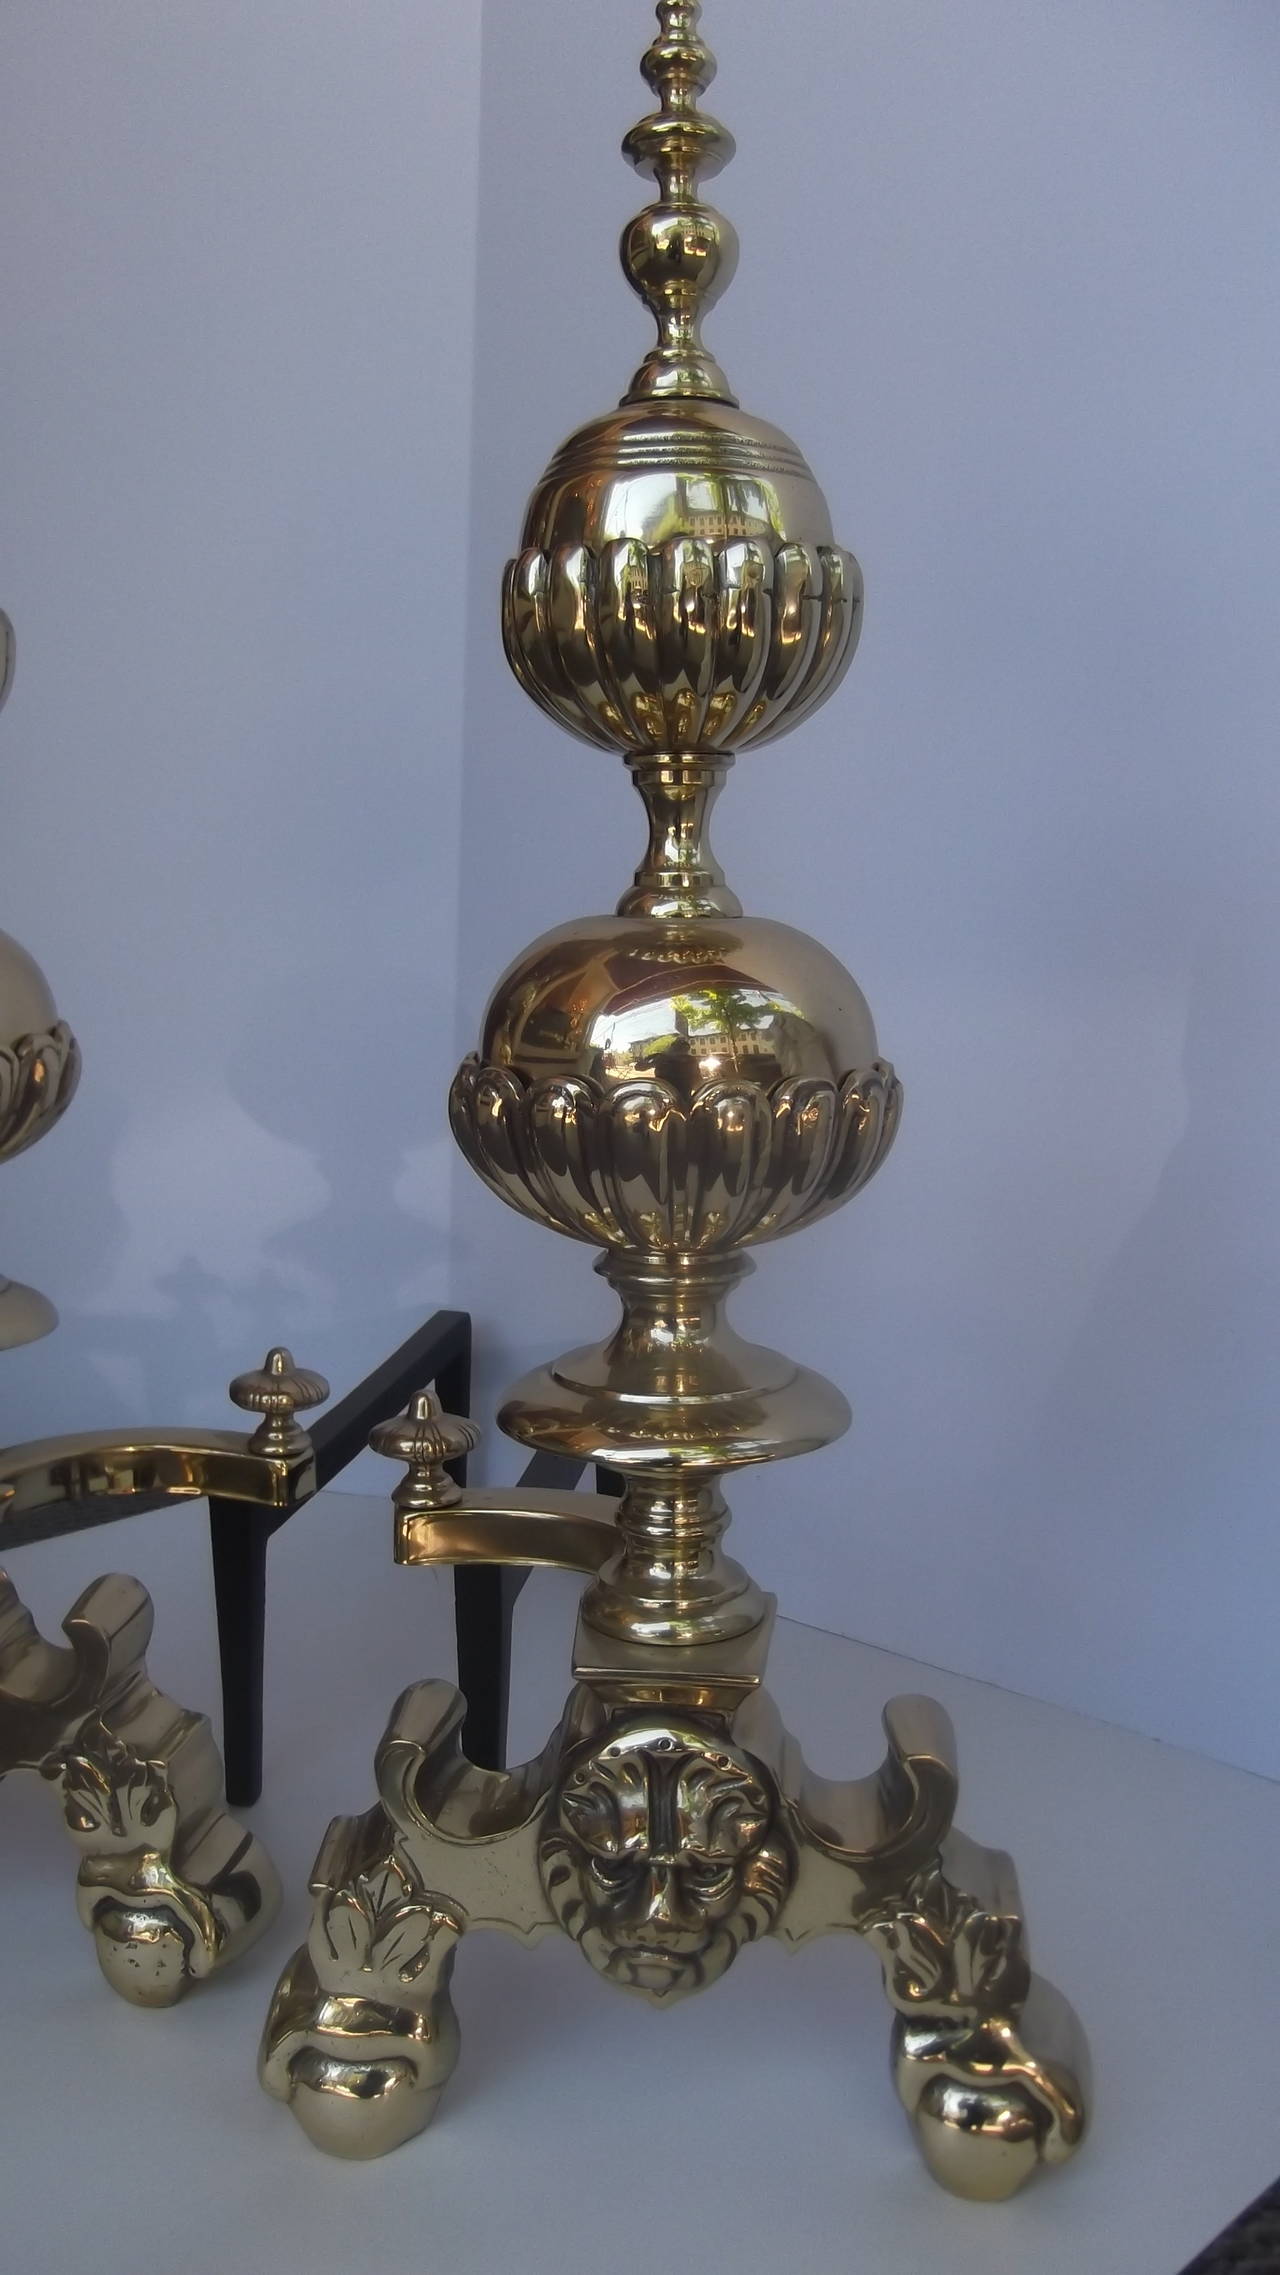 Magnificent pair of polished circa early 1900's solid brass andirons
Classic two graduated decorated spheres and spiral finial resting on lion head ball and claw feet.  The shanks are cast iron. Newly polished and lacquered.